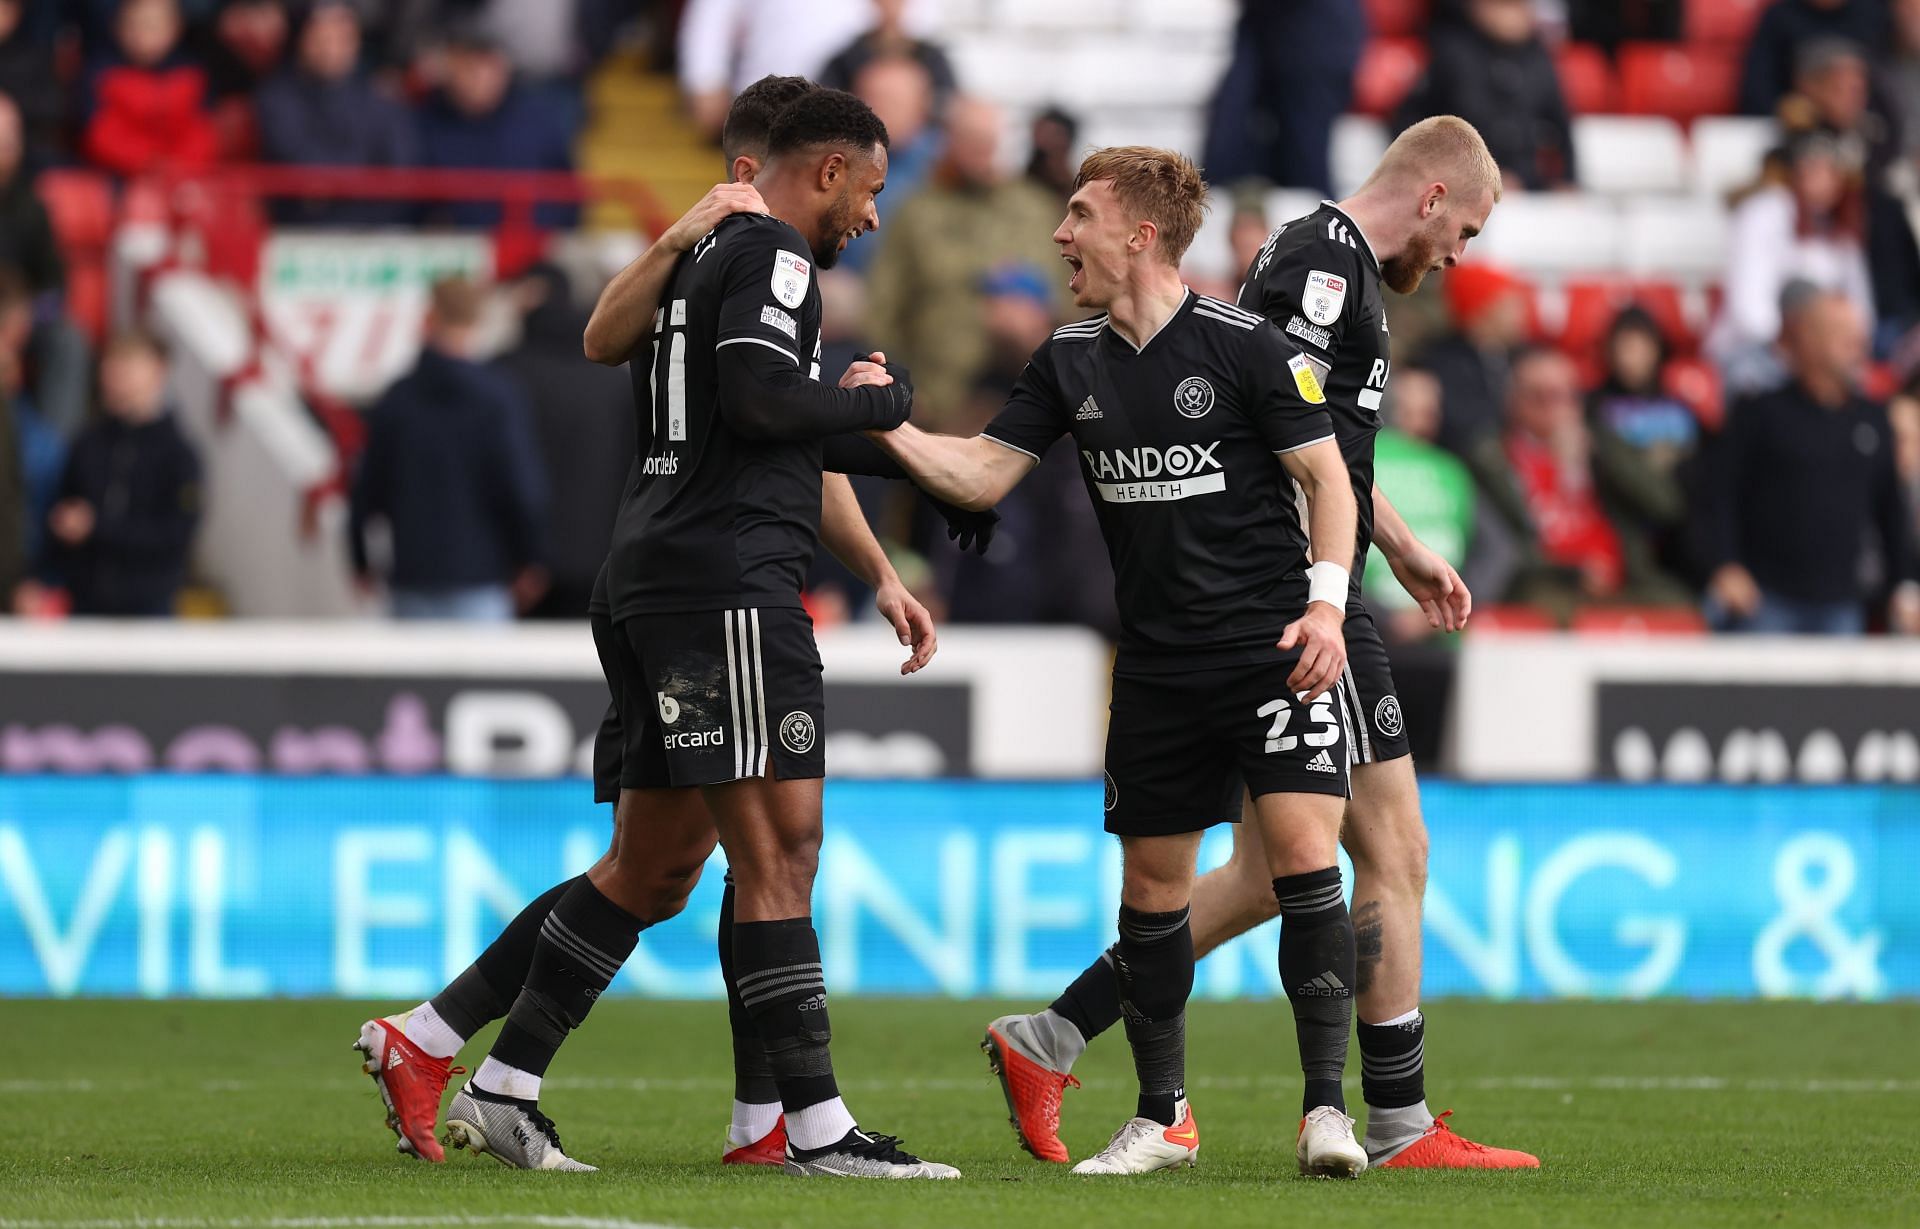 Sheffield United are looking to build upon their momentum on Saturday